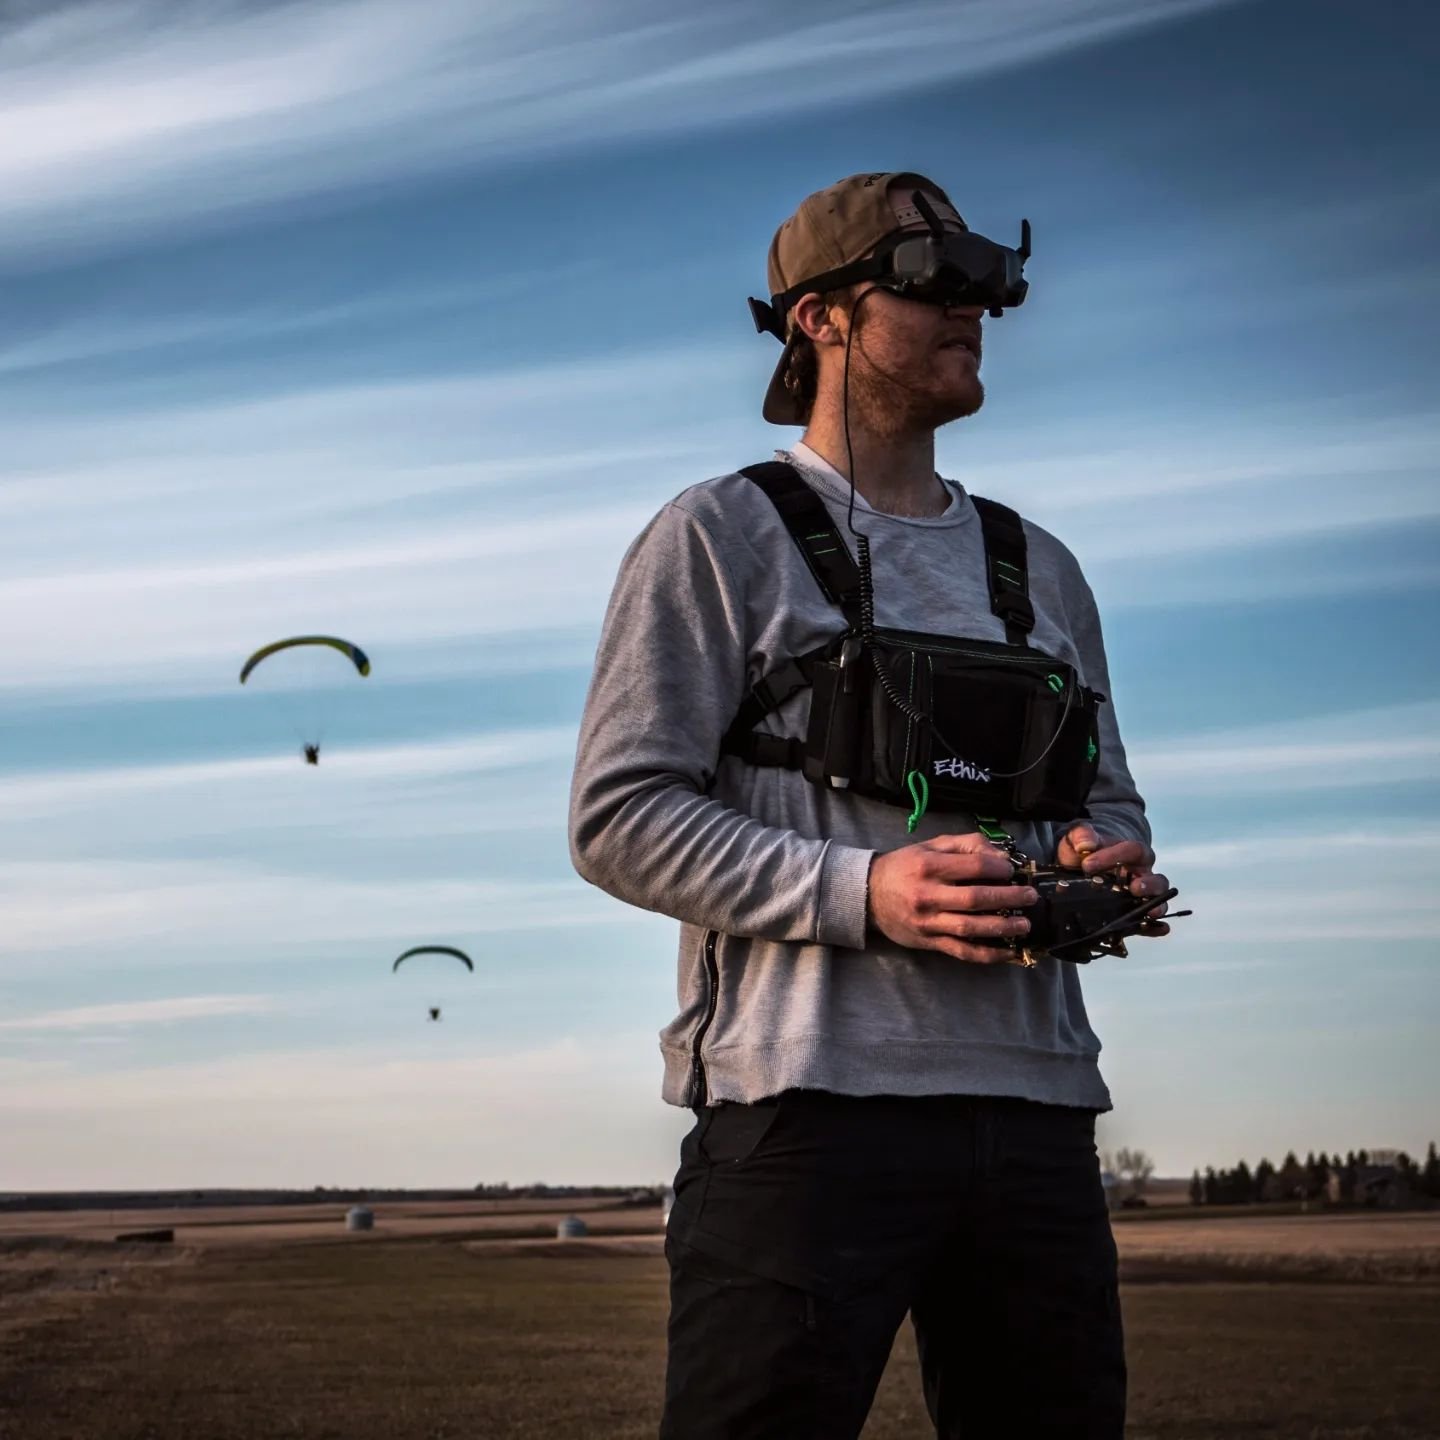 Got to chase something new and I gotta say, it was the most fun I have had flying in a long time.

(📸 @nateharms.fpv)

#fpv #fpvpilot #dronepilot #dronephotography #dronephoto #calgaryisbeautiful #paramotor #paramotoring #albertaviews #dji #springvi